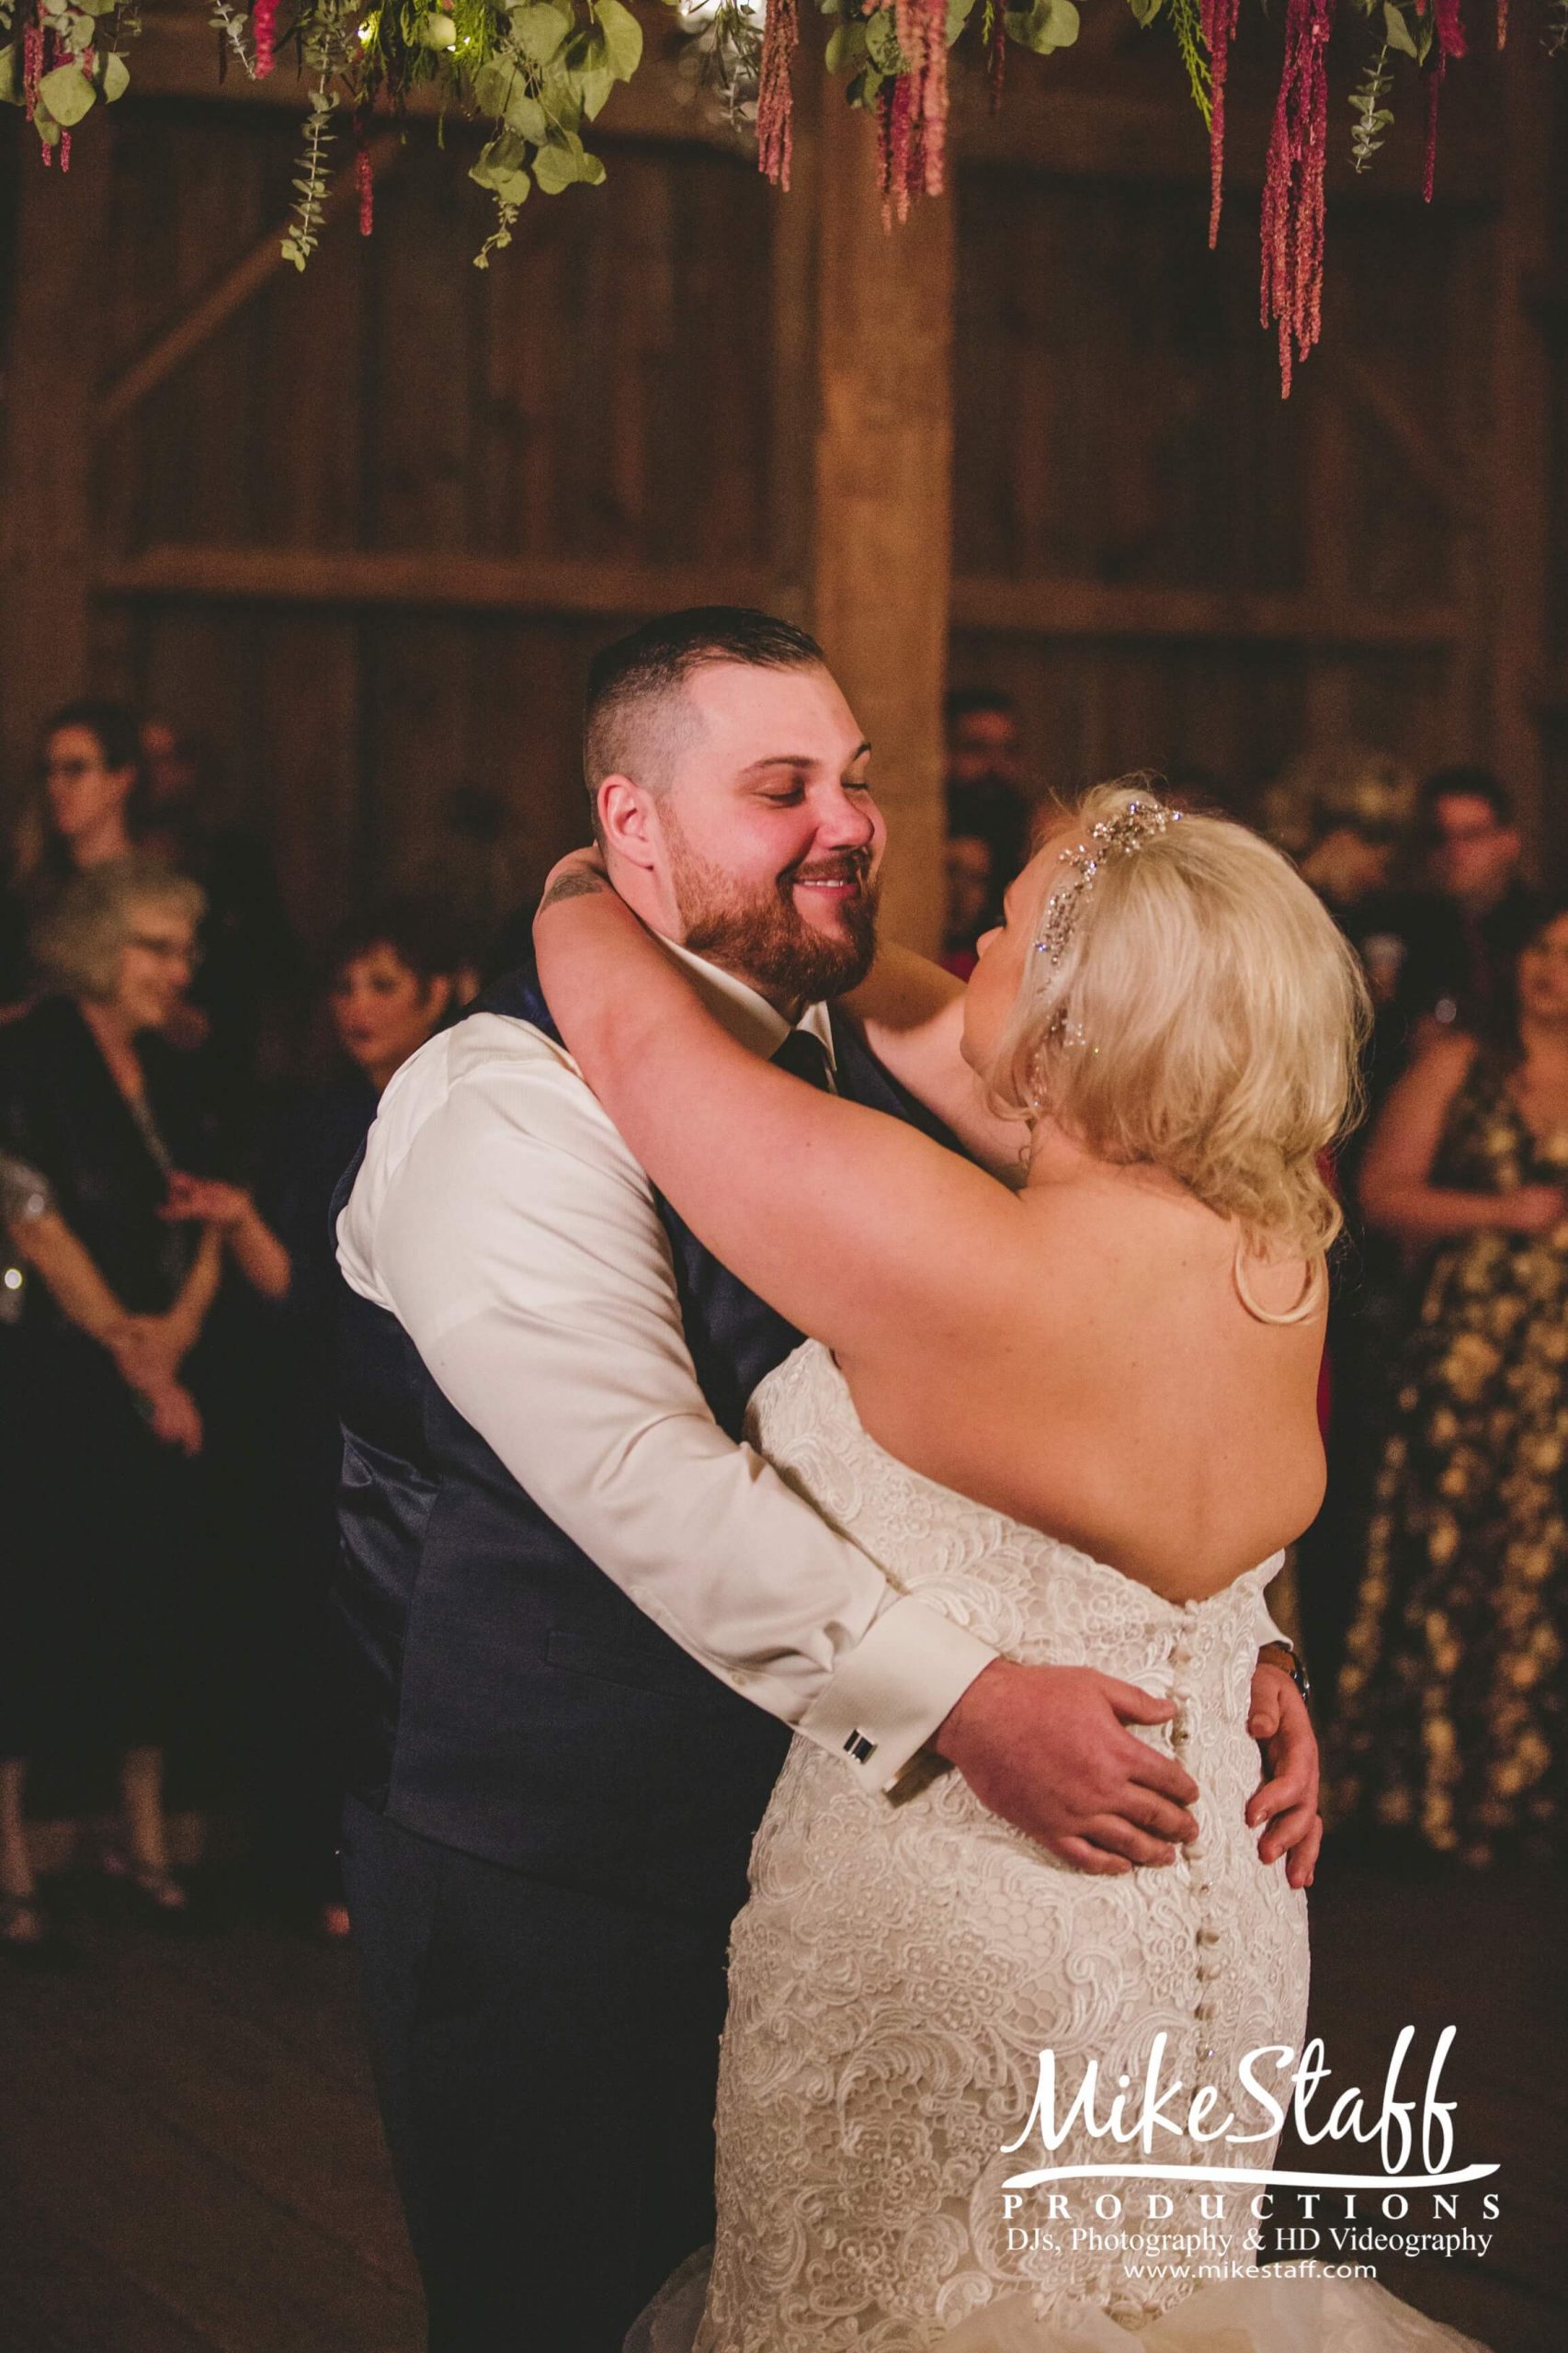 bride and groom's first dance at barn wedding reception